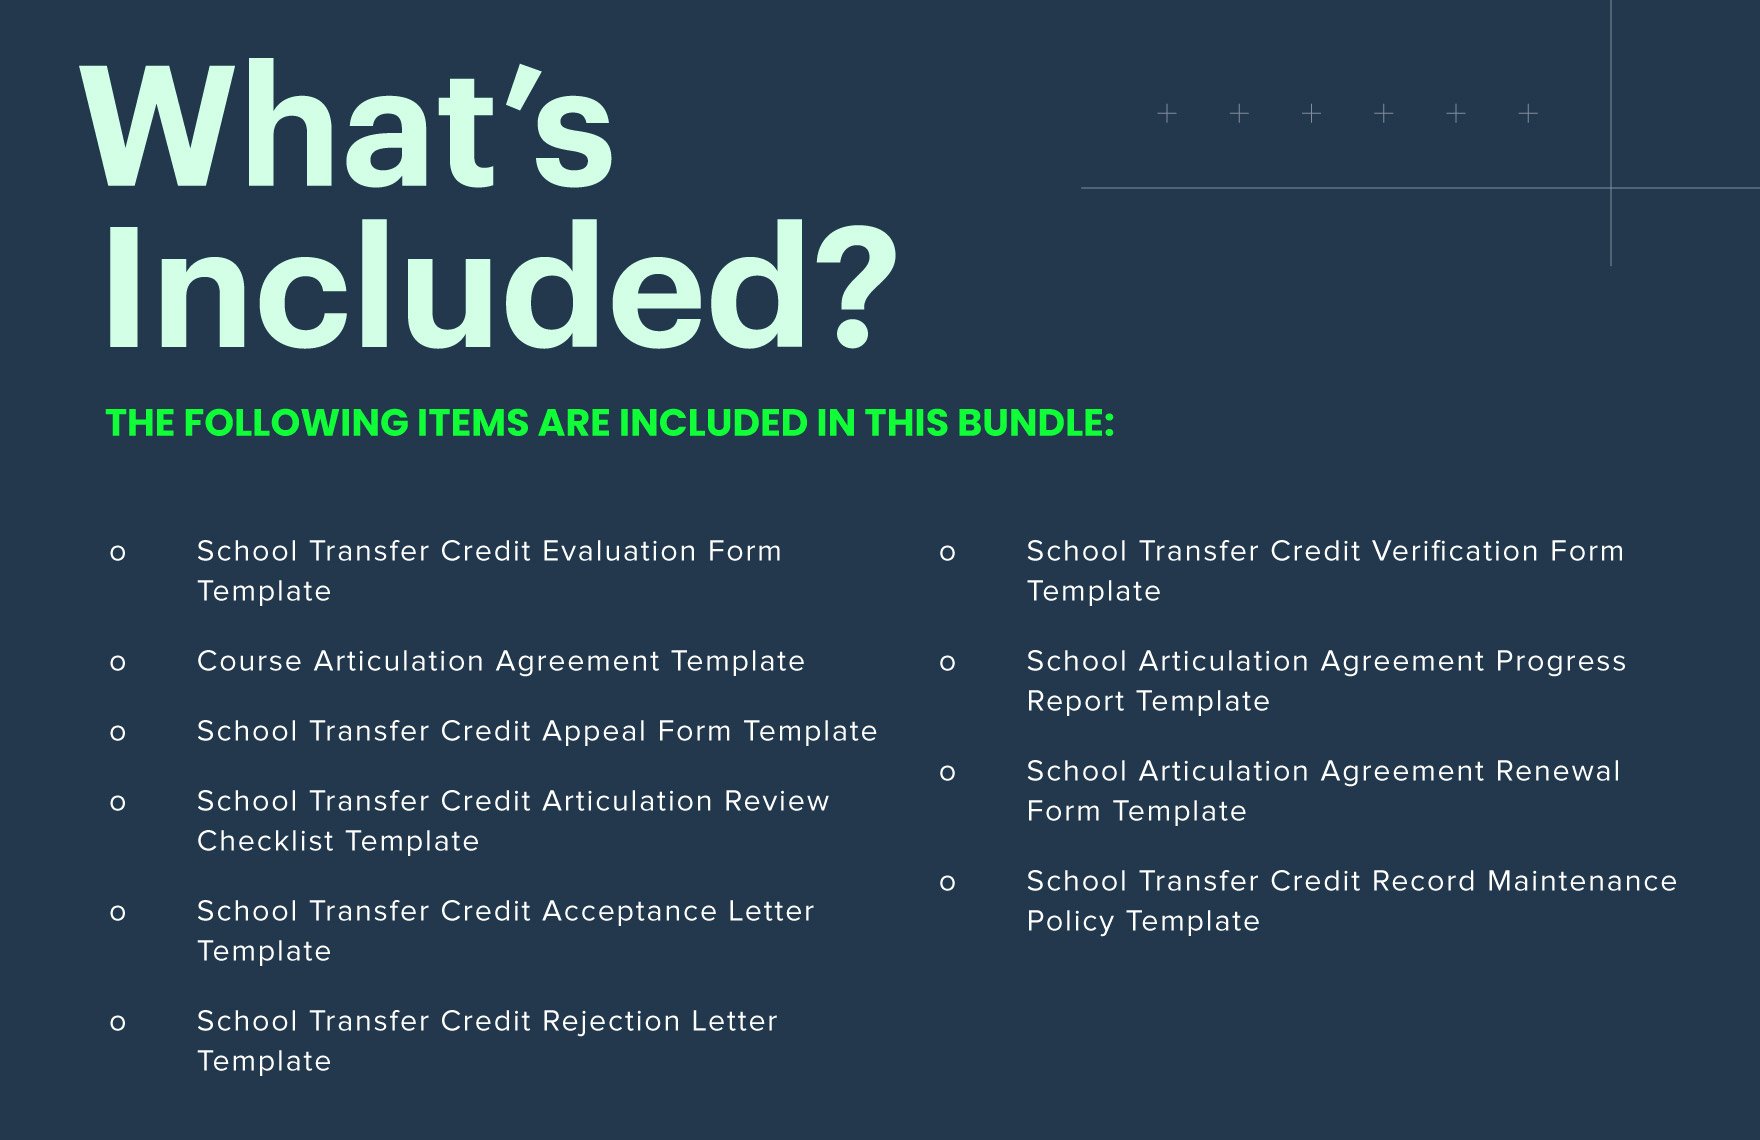 10 Education Transfer Credit and Articulation Template Bundle